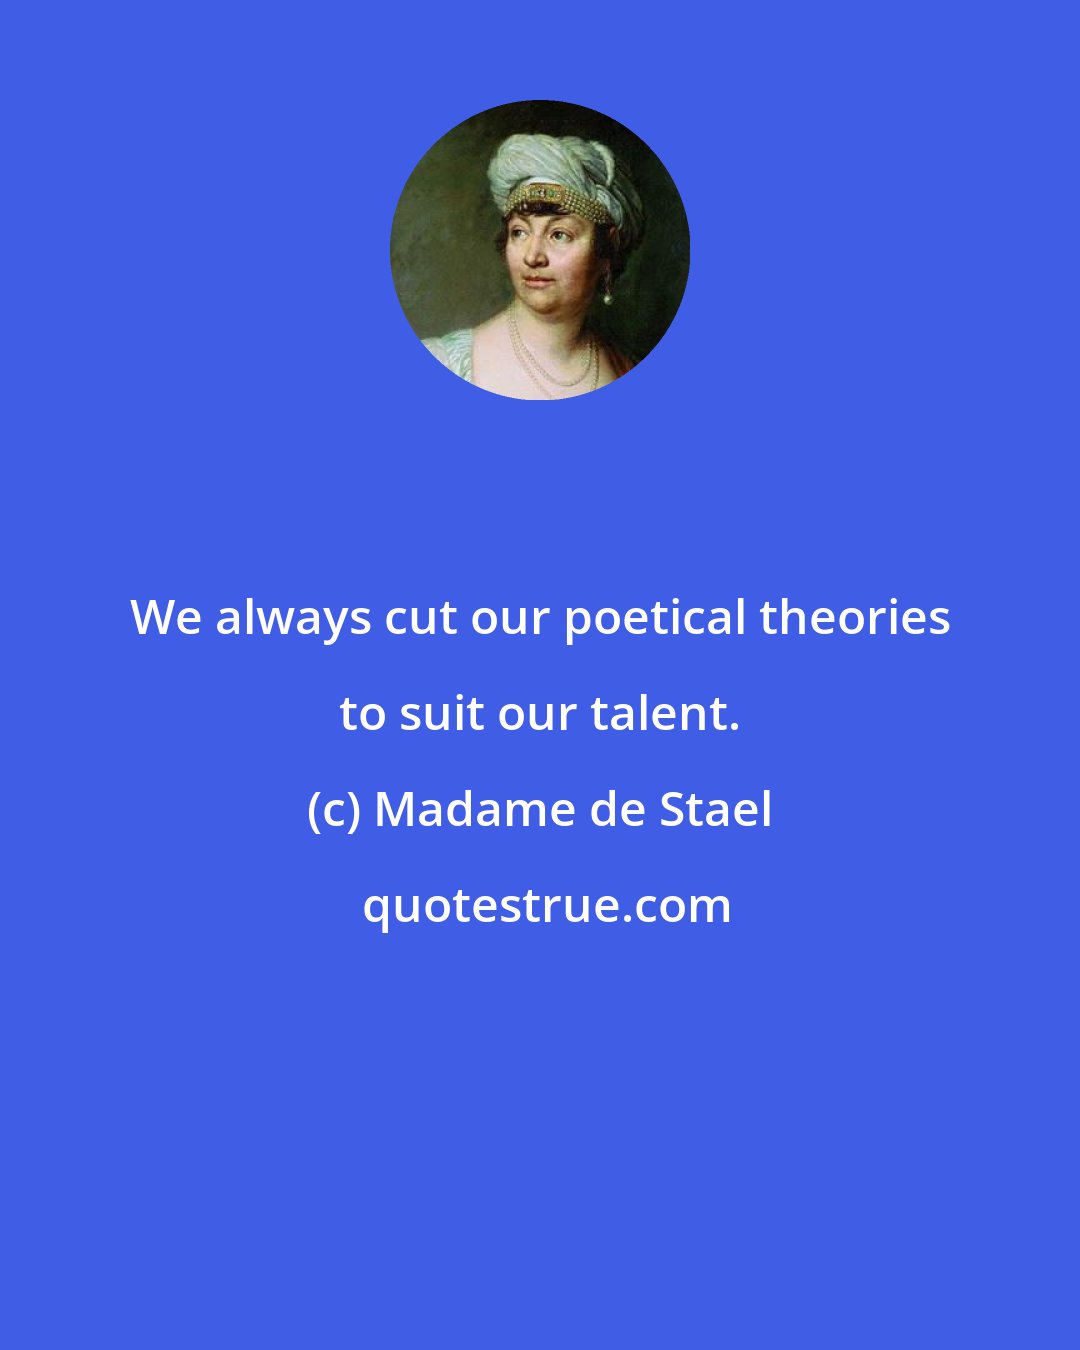 Madame de Stael: We always cut our poetical theories to suit our talent.